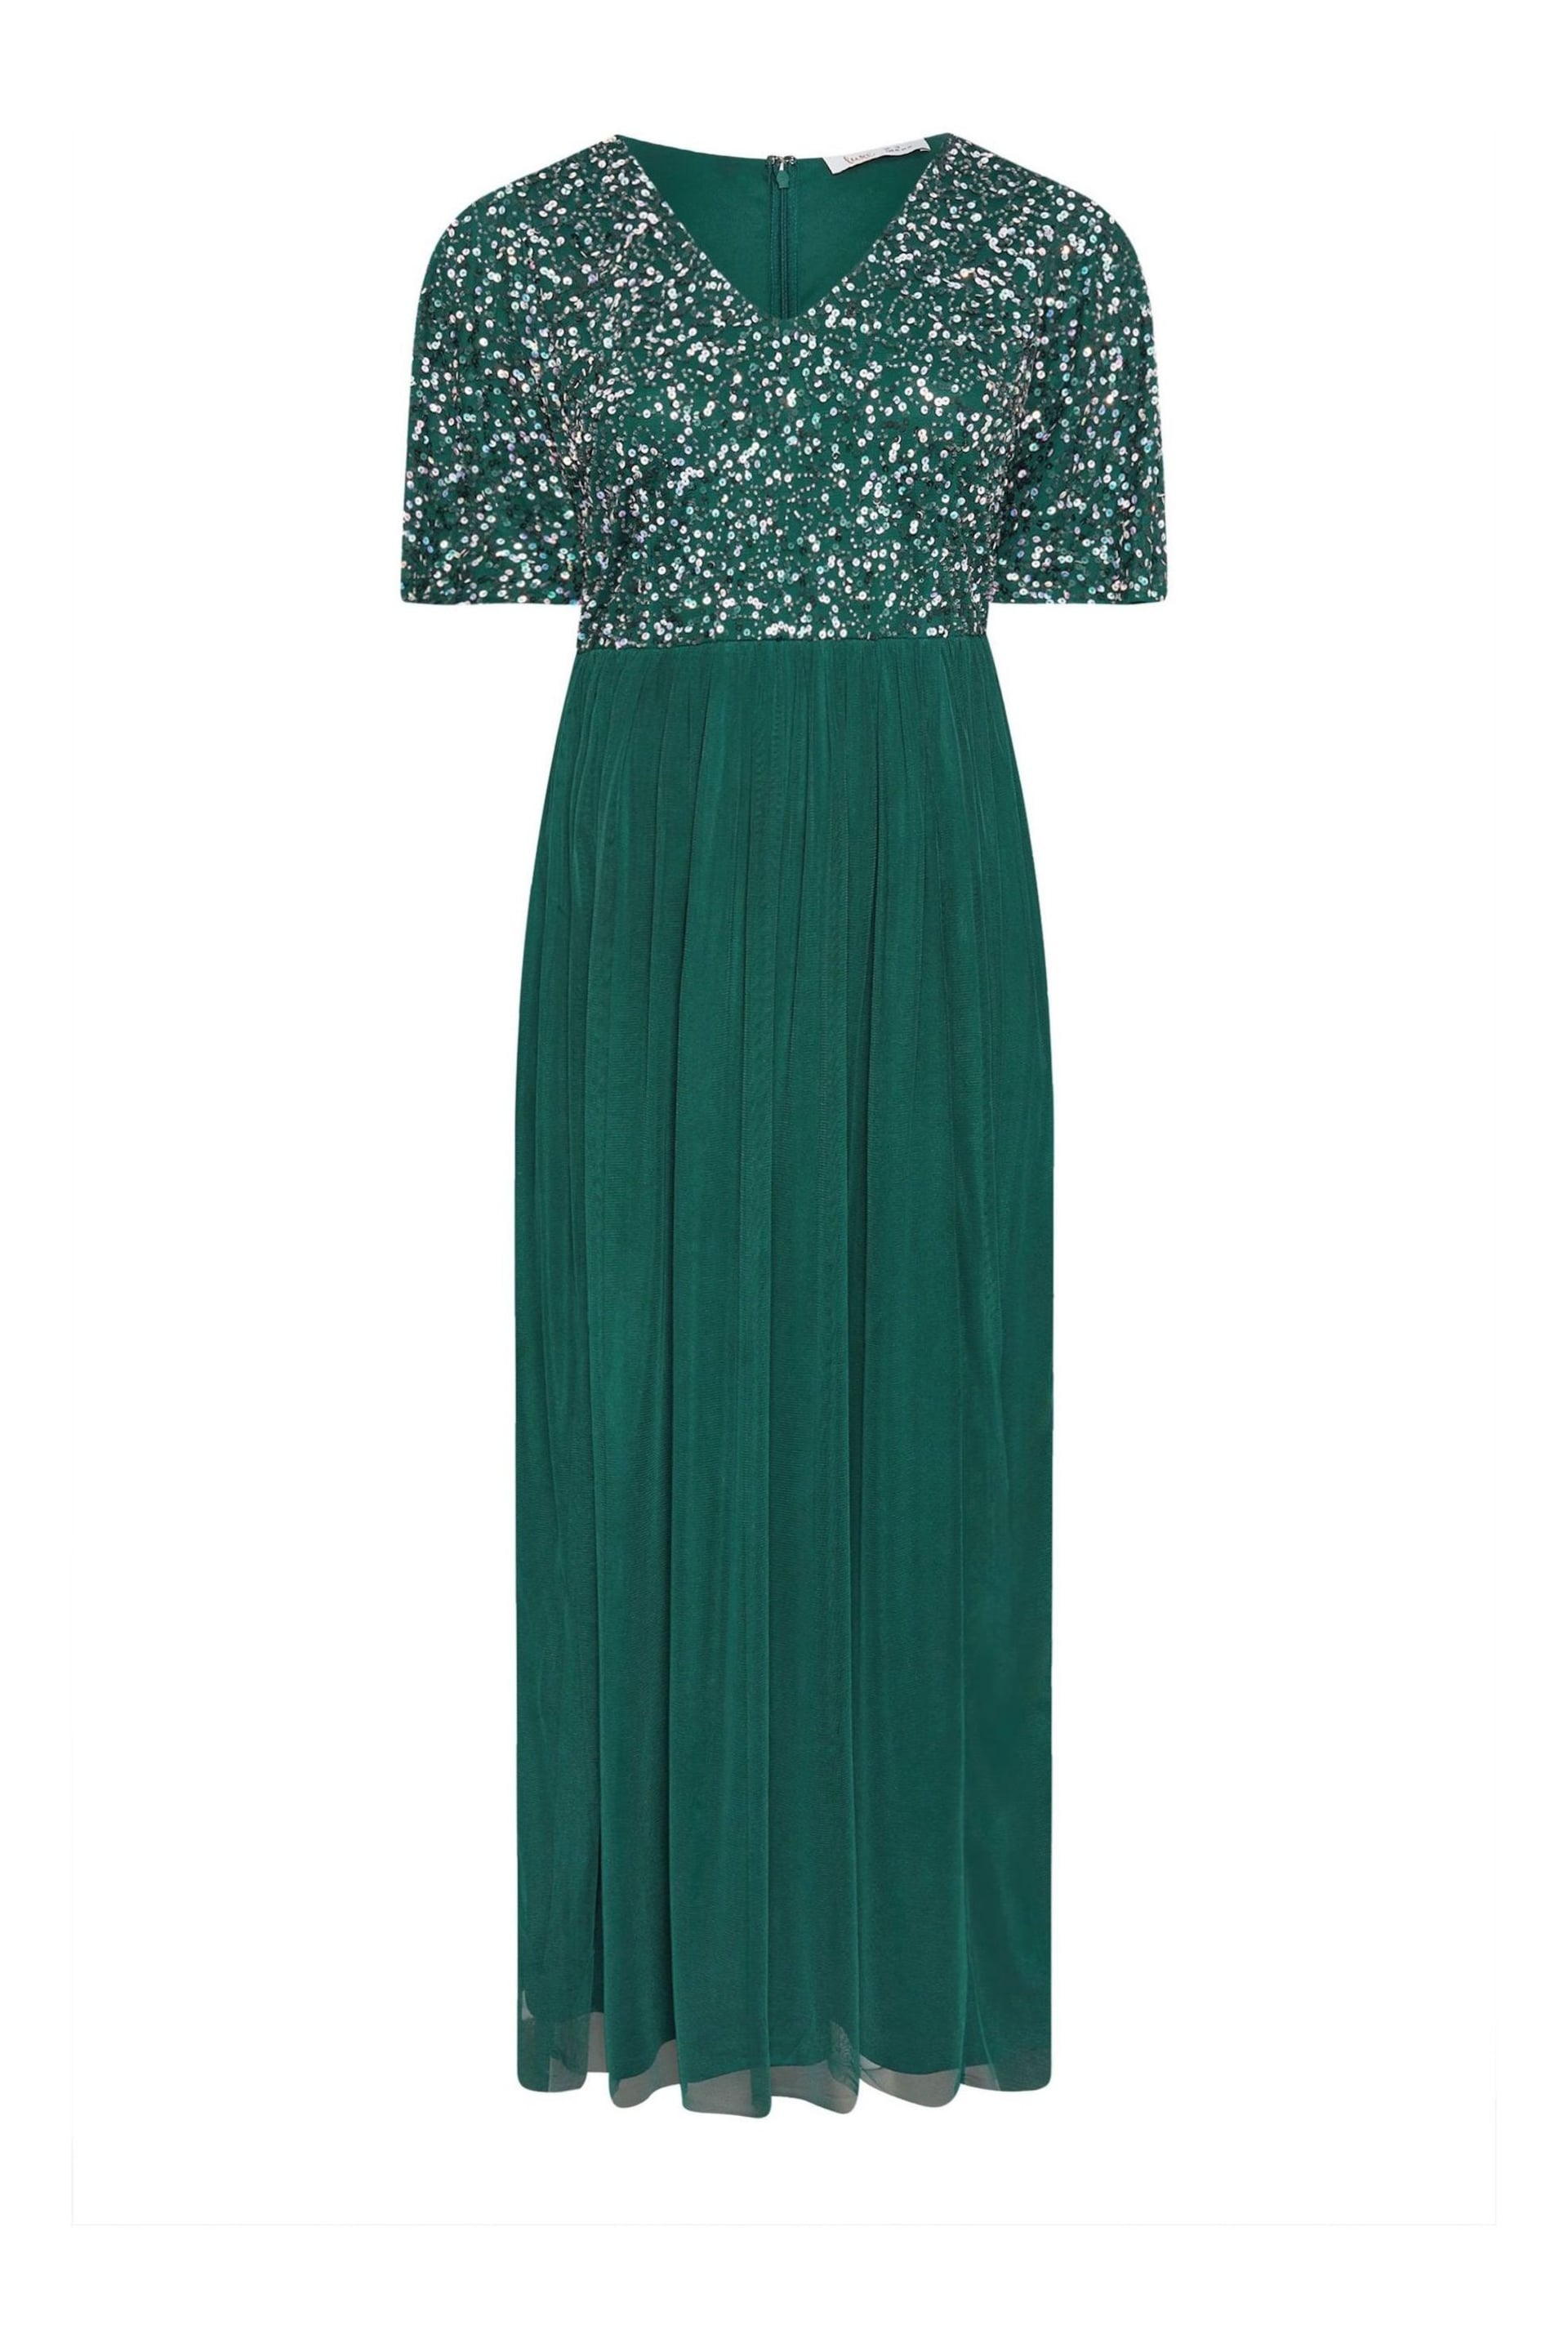 Yours Curve Green Luxe Embellished Angel Sleeve Maxi Dress - Image 5 of 5